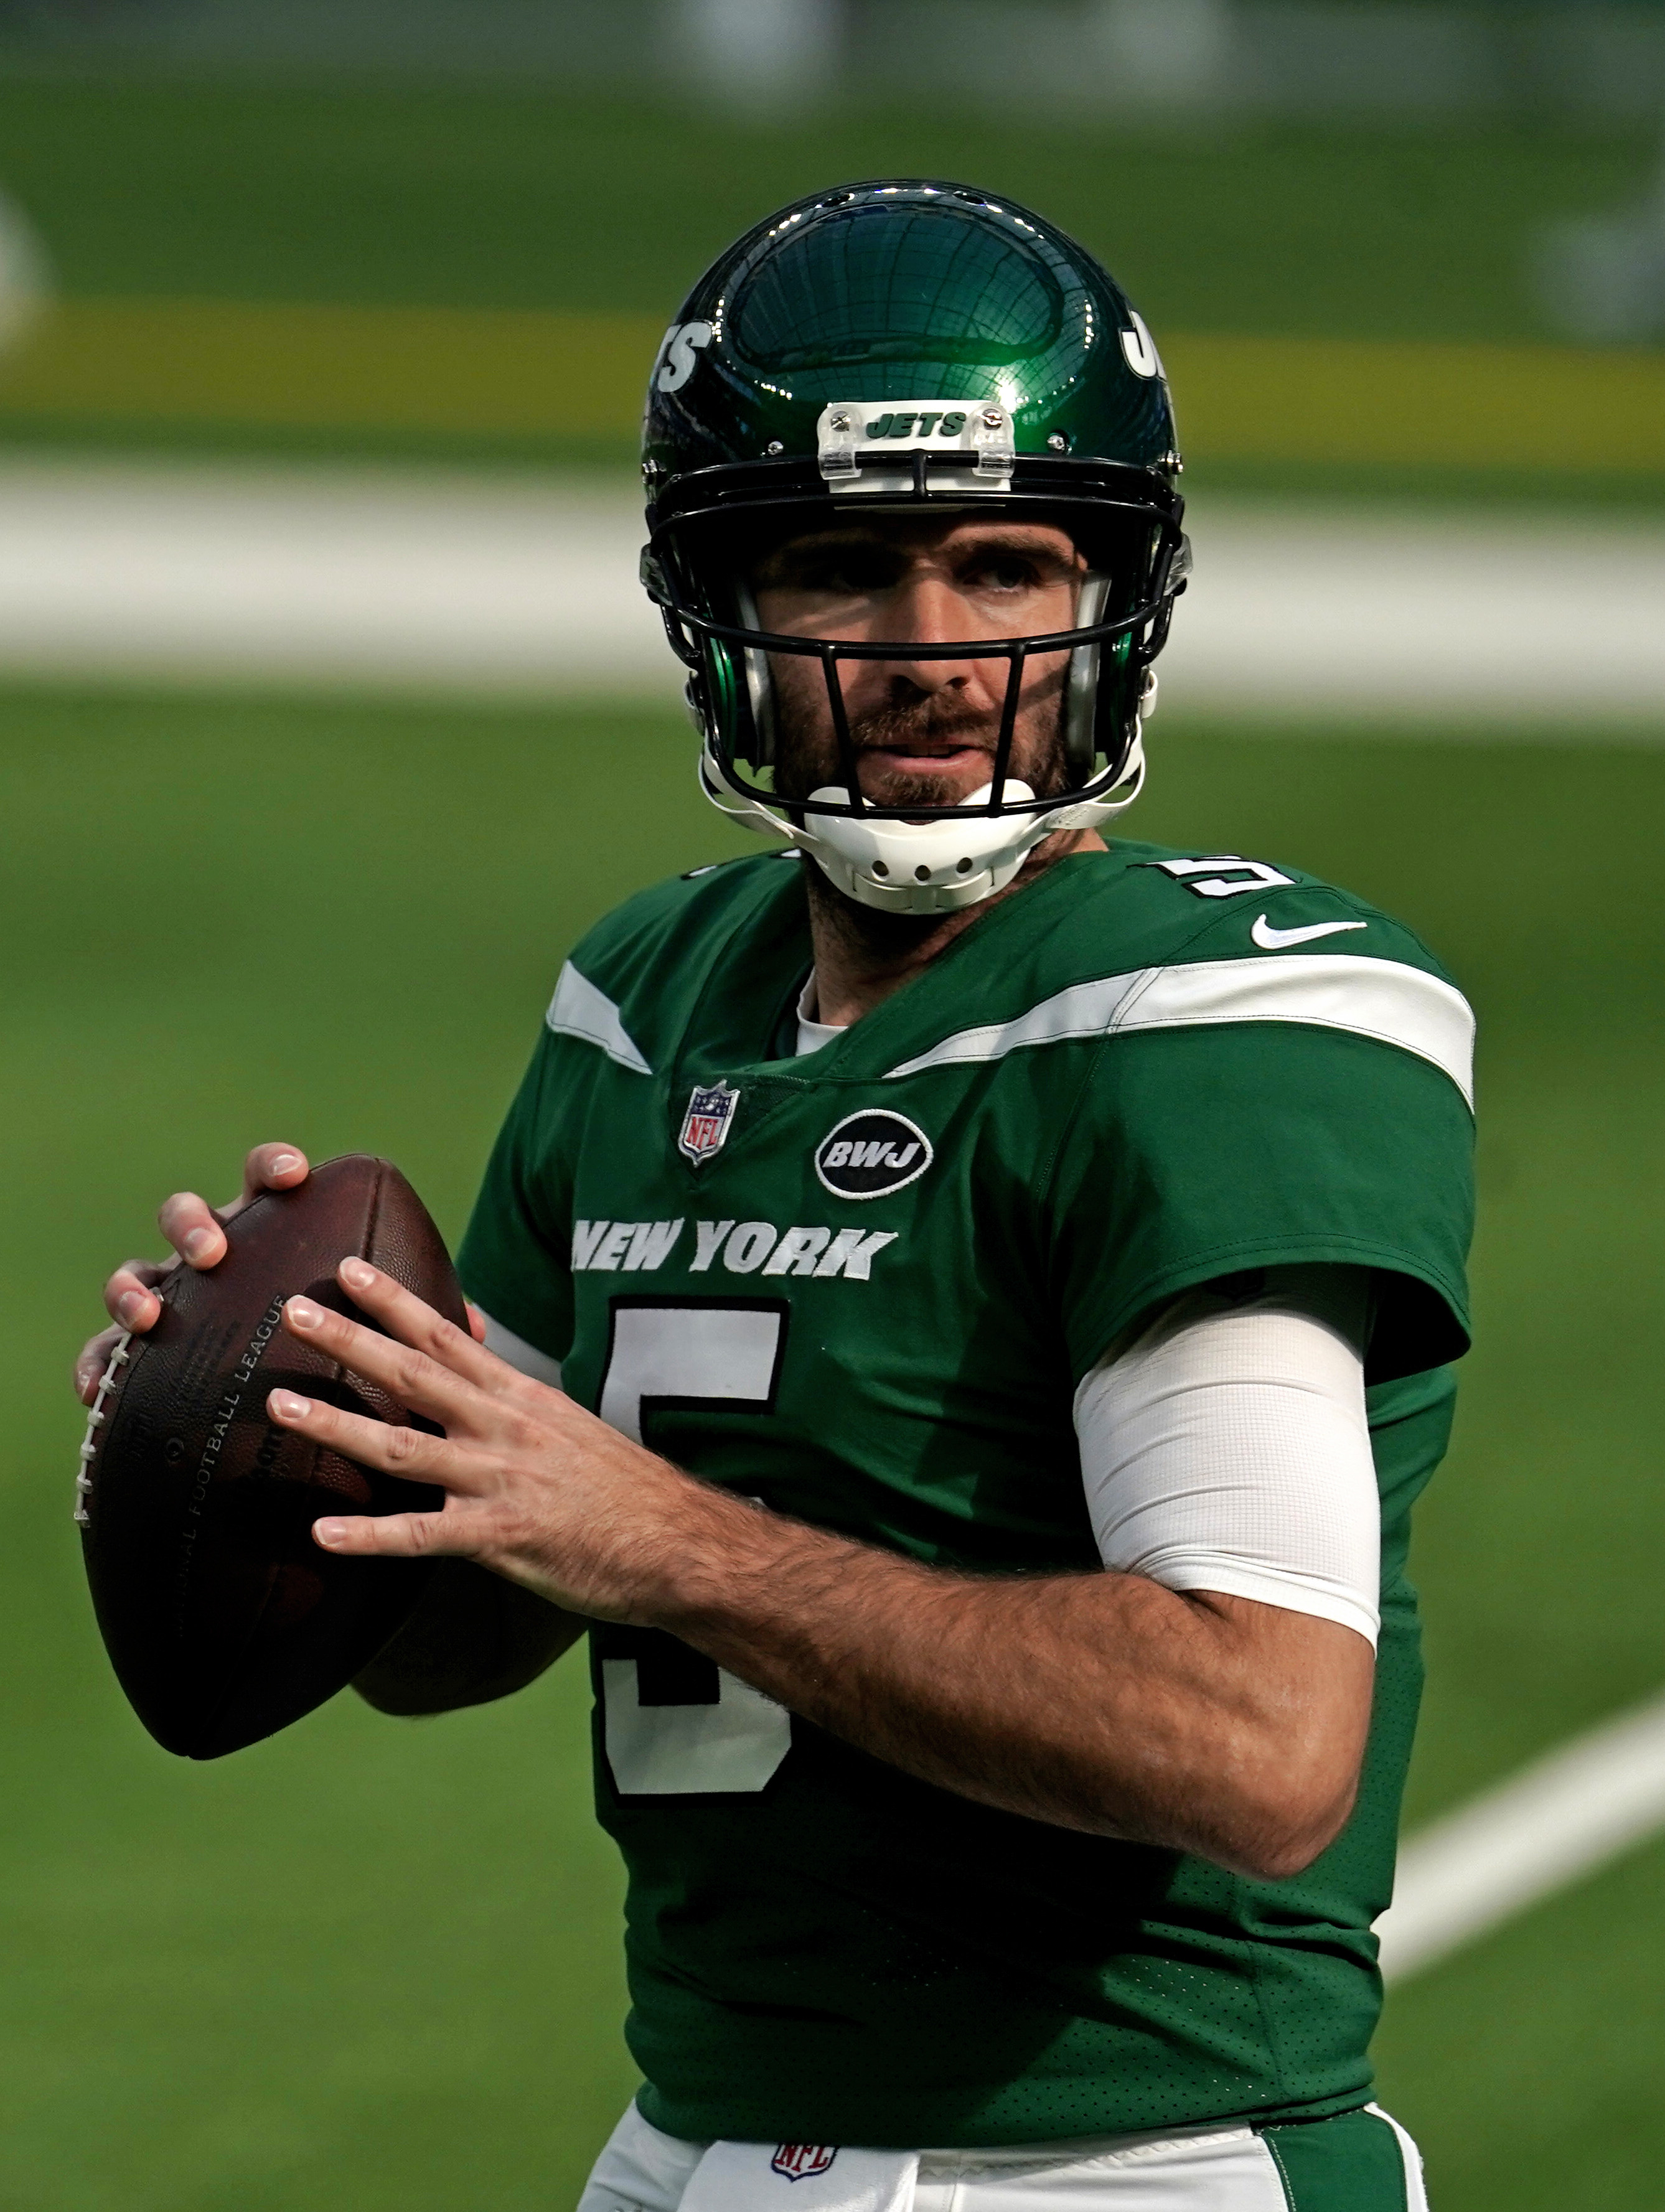 Jets' new uniforms not too bad in hindsight